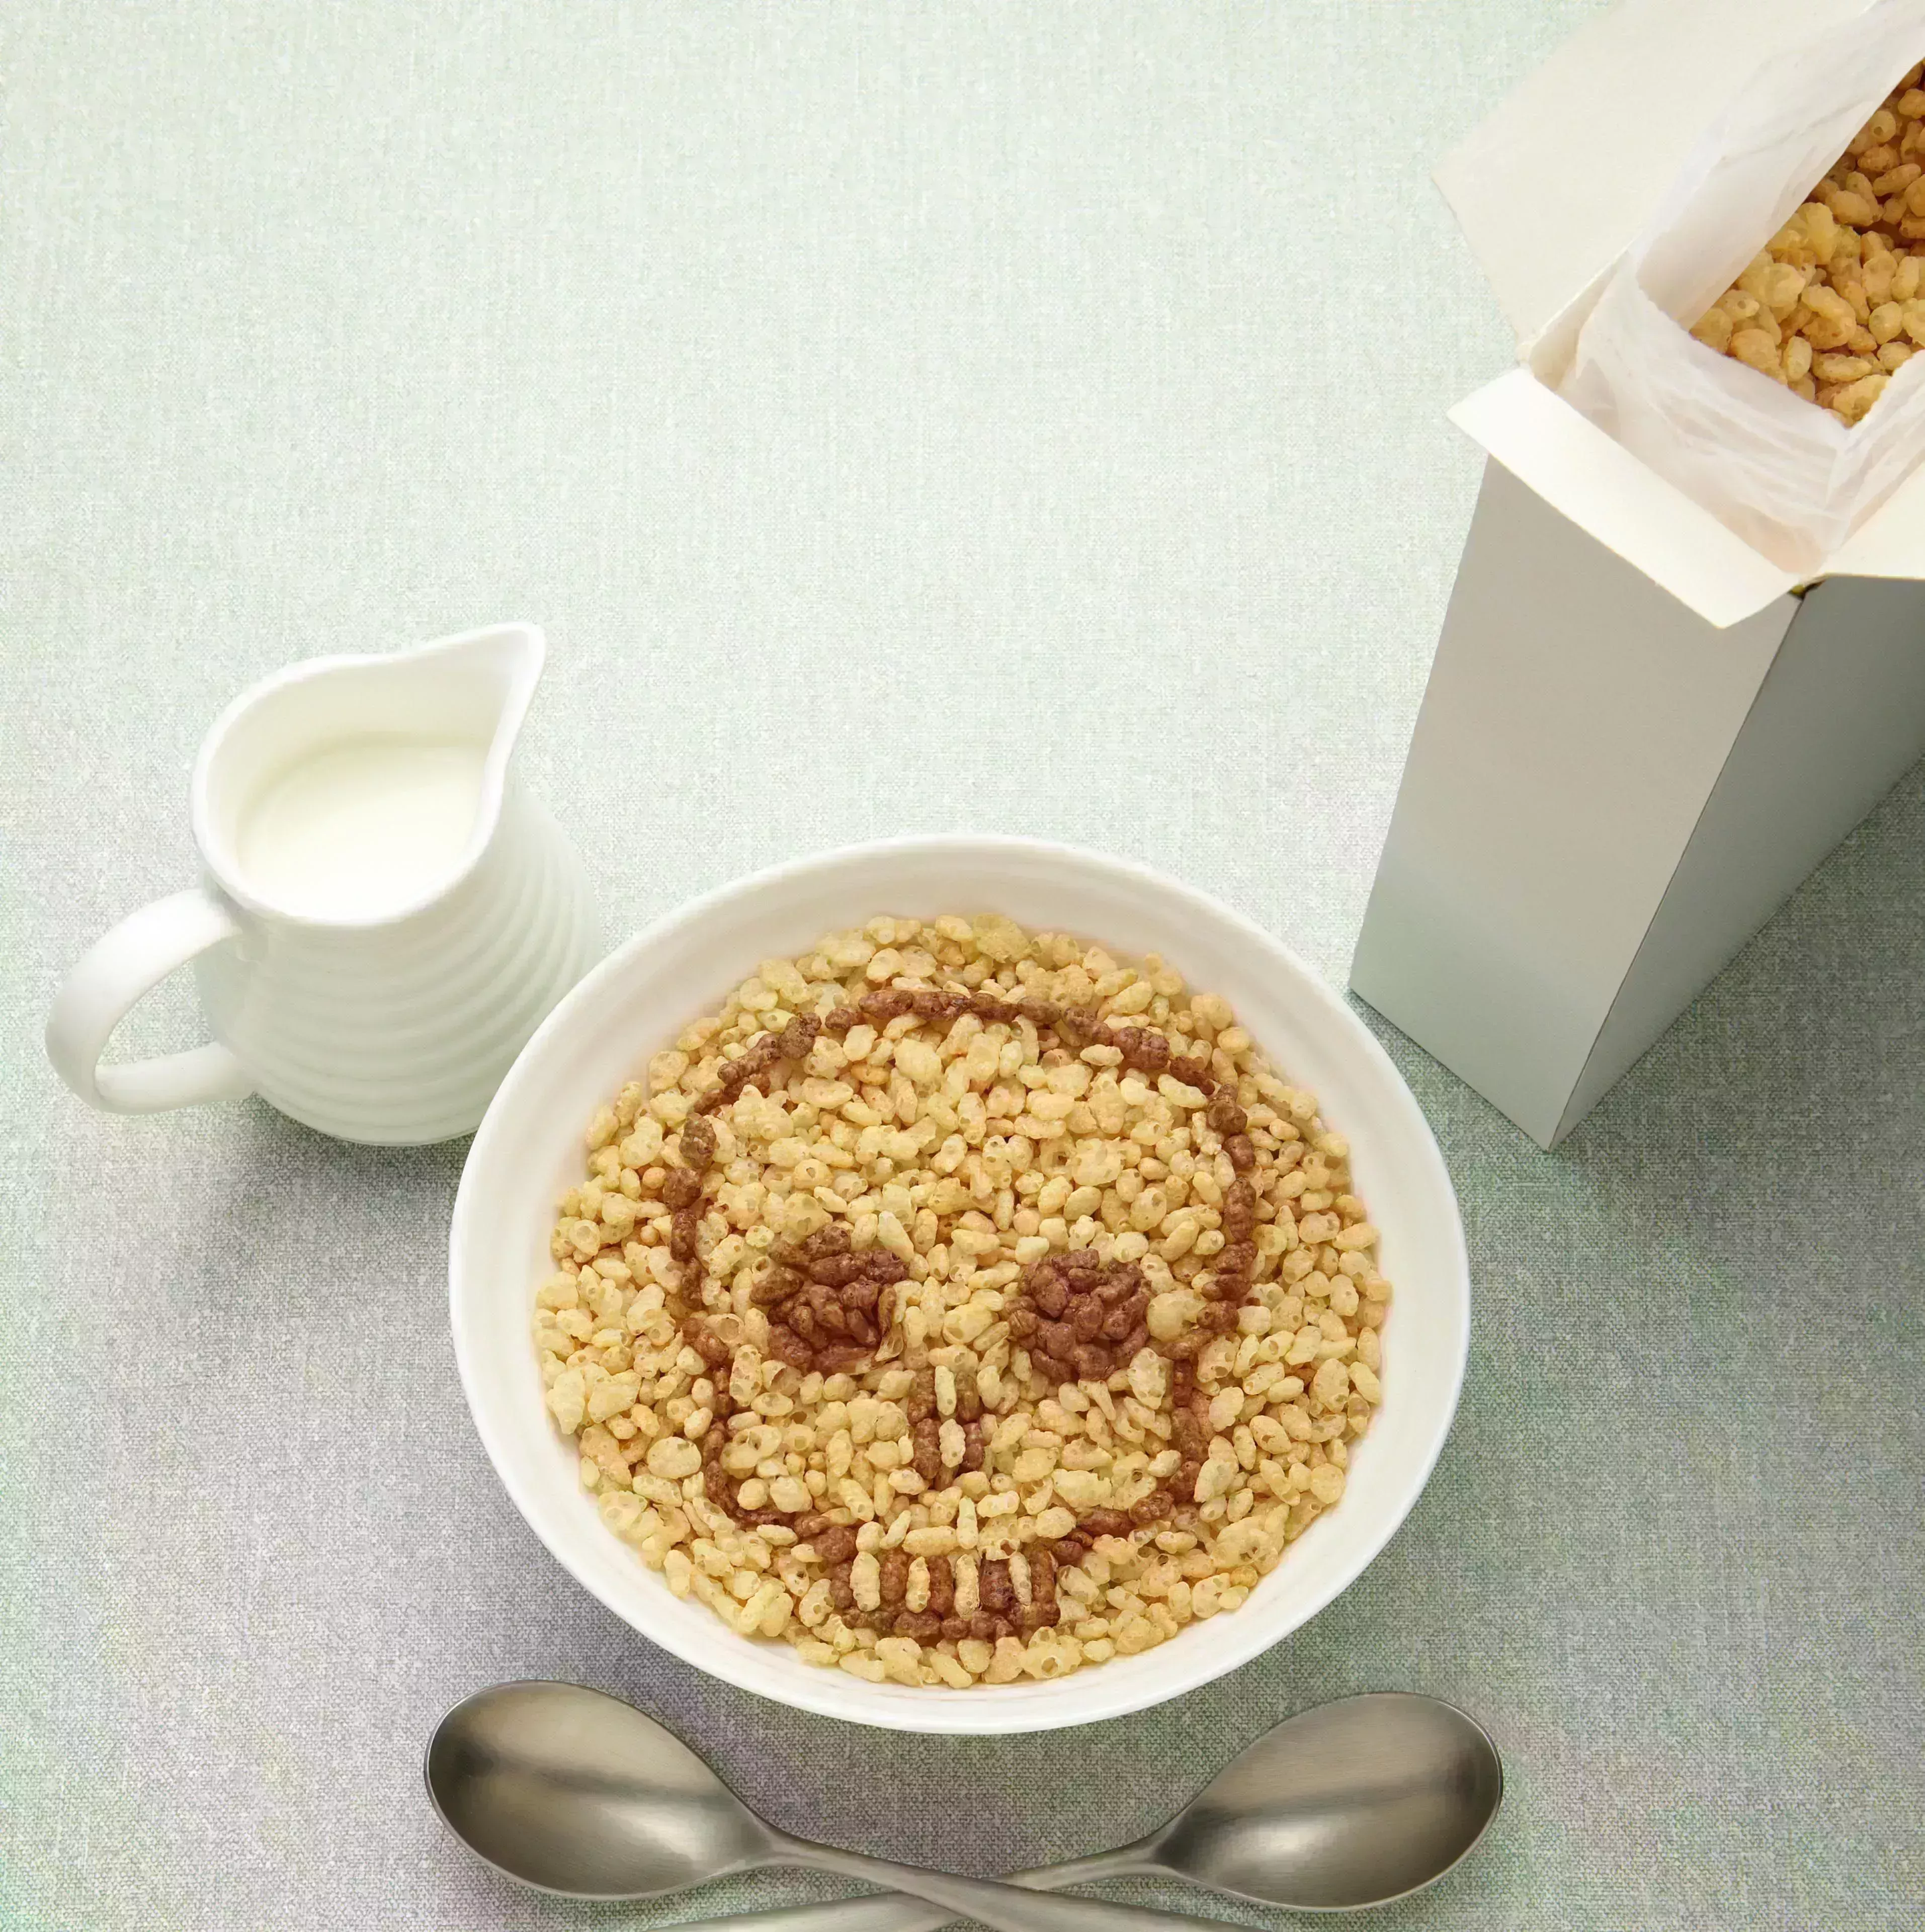 bowl of breakfast cereal with rice krispies styled to look like a skull, with spoons as cross bones, jug of milk, conceptcereal killers sell boxed breakfasts that claim they jump start your day more often than not derail your diet intro pouring yourself a bowl of crunchy cereal is a fast way to fuel up in the am â€“ and research shows that people who do so consume more produce and whole grains during the day the catch you have to pick the right cereal a single bowlful can slow down your metabolism, pile on the pounds and give you a bigger mood crash than a banker on bonus day hereâ€™s how to make a wise morning meal decision